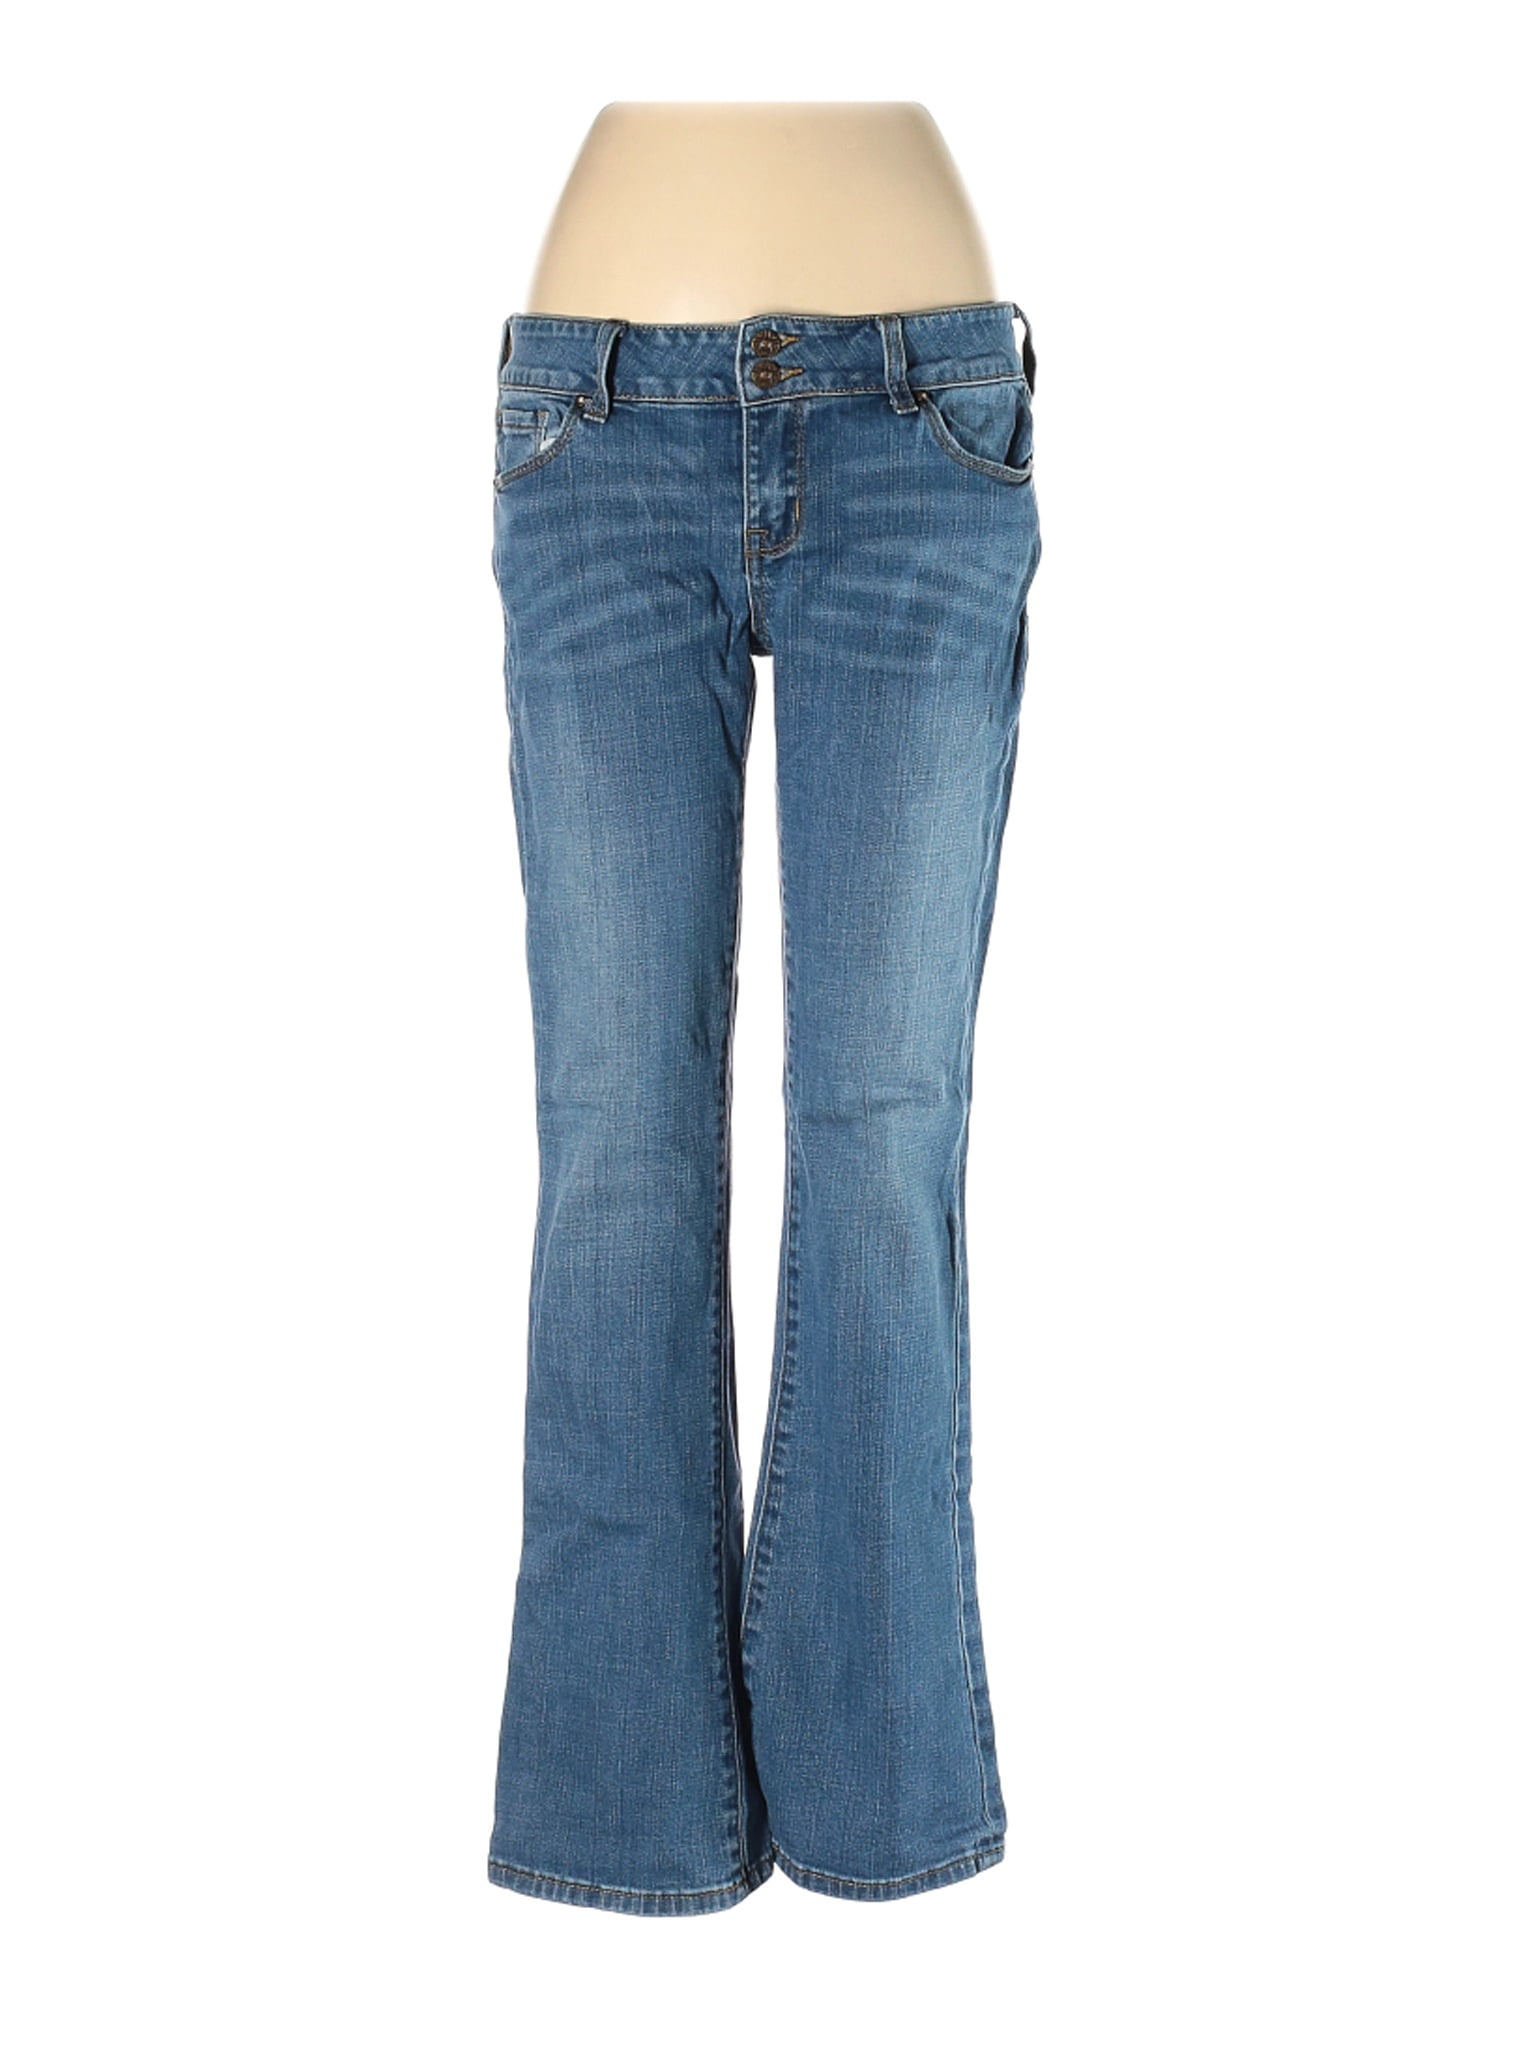 jeans similar to charlotte russe